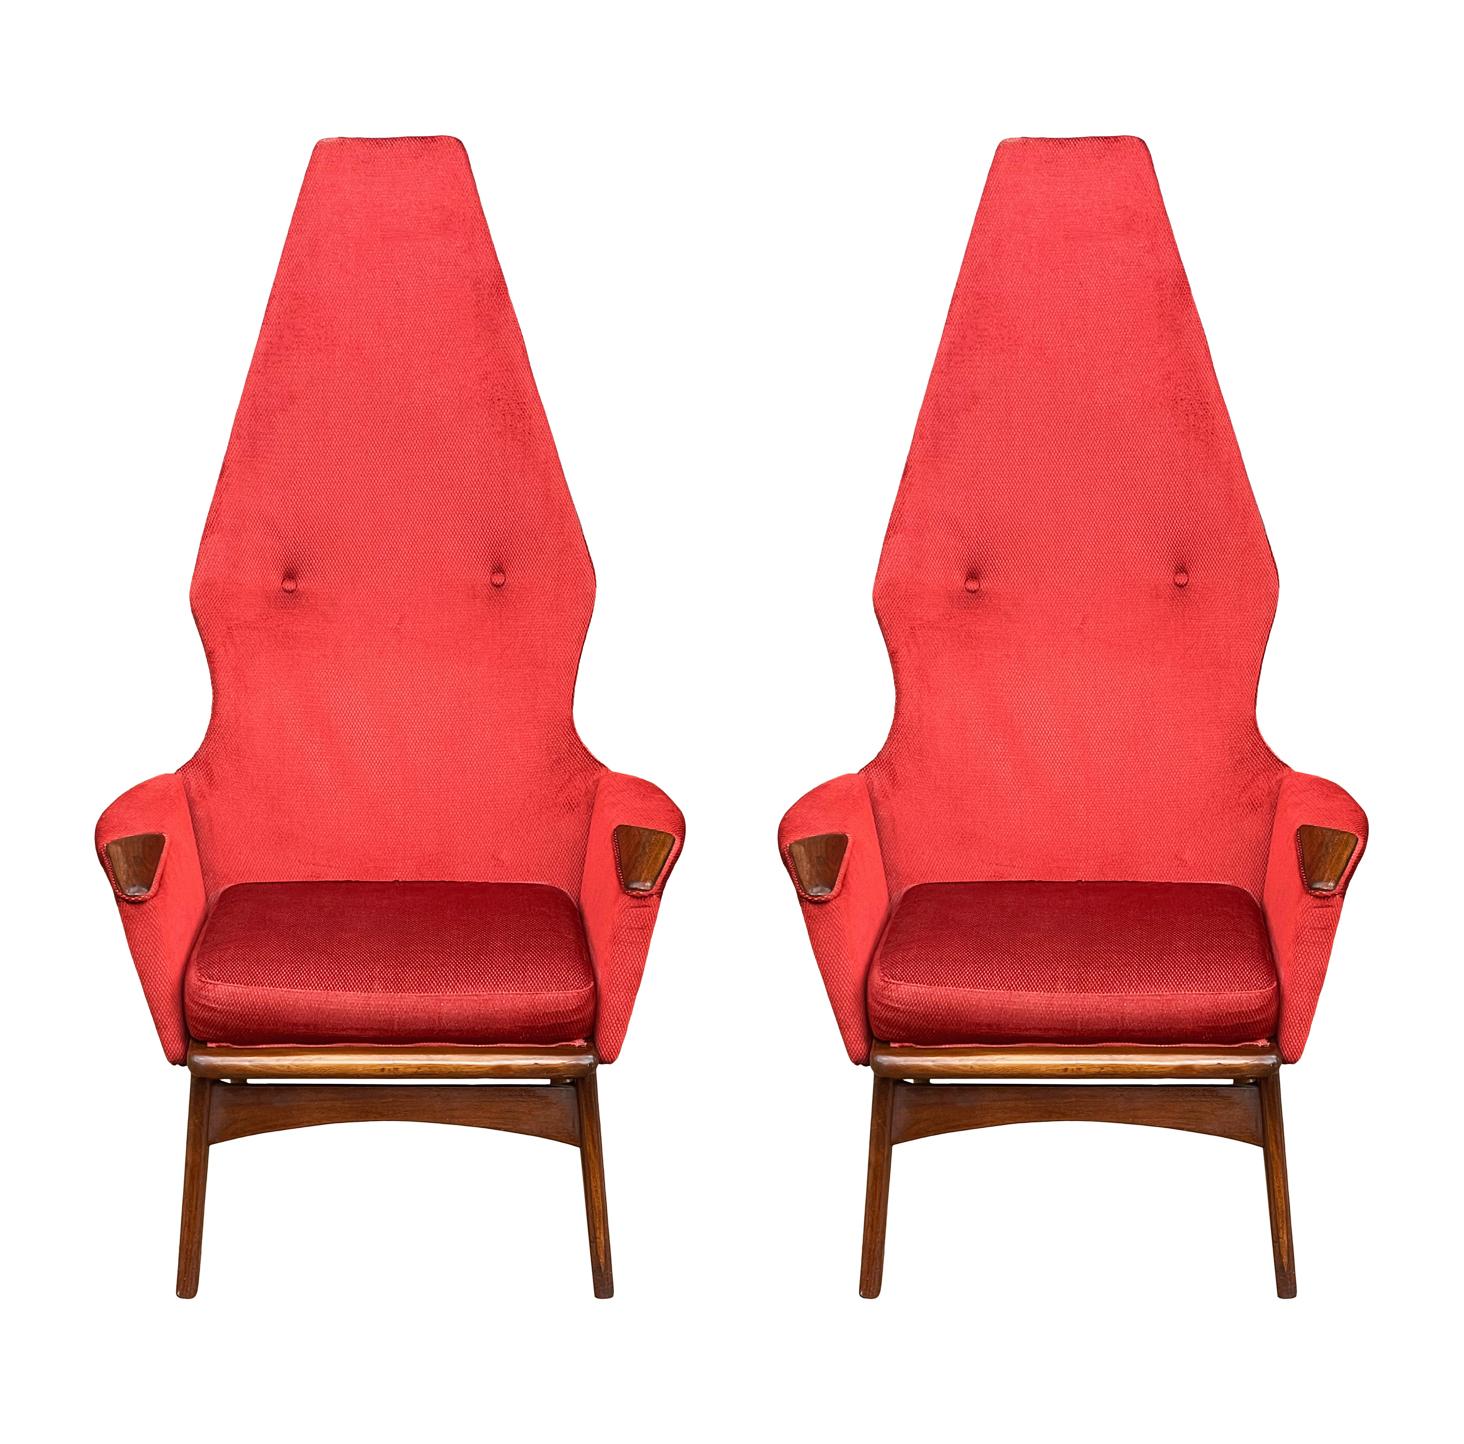 Pair Mid-Century Modern Sculptural High Back Lounge Chairs by Adrian Pearsall For Sale 1